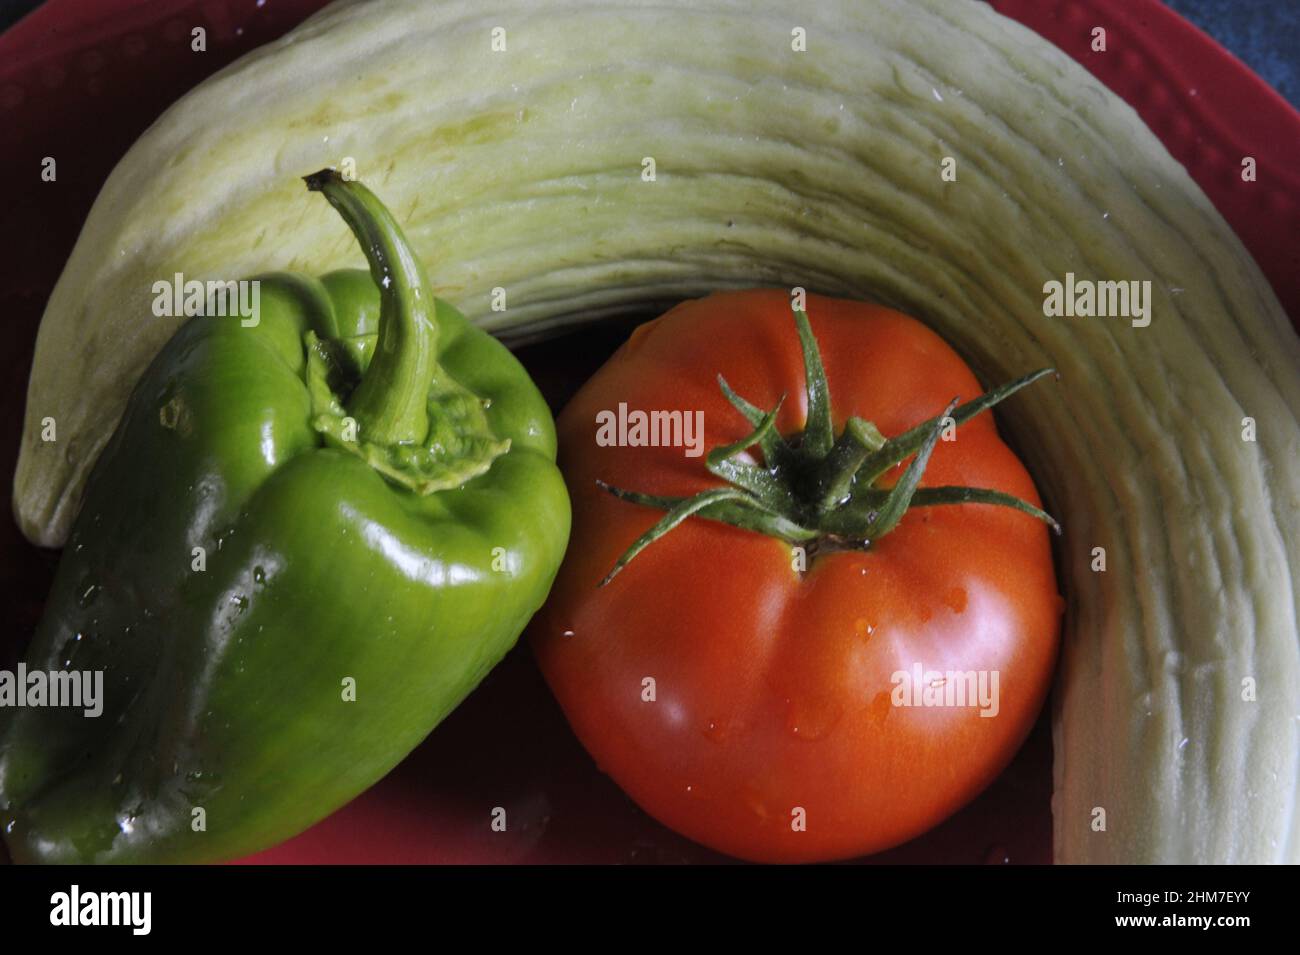 Close-up top view of freshly picked green pepper, tomato and zucchini in a red bowl Stock Photo